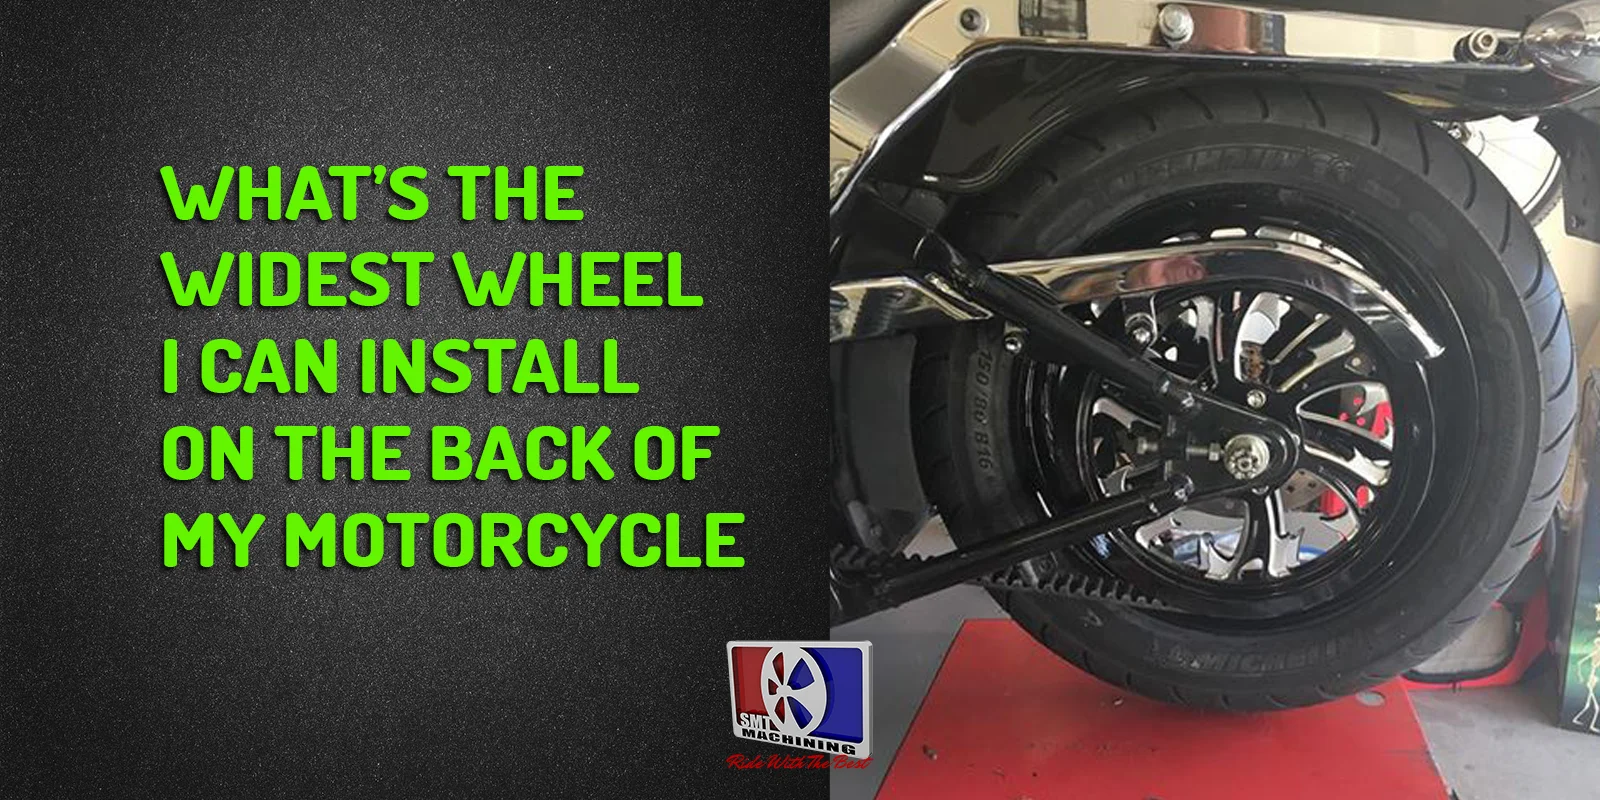 What Is The Widest Wheel You Can Install On The Back Of Your Motorcycle?